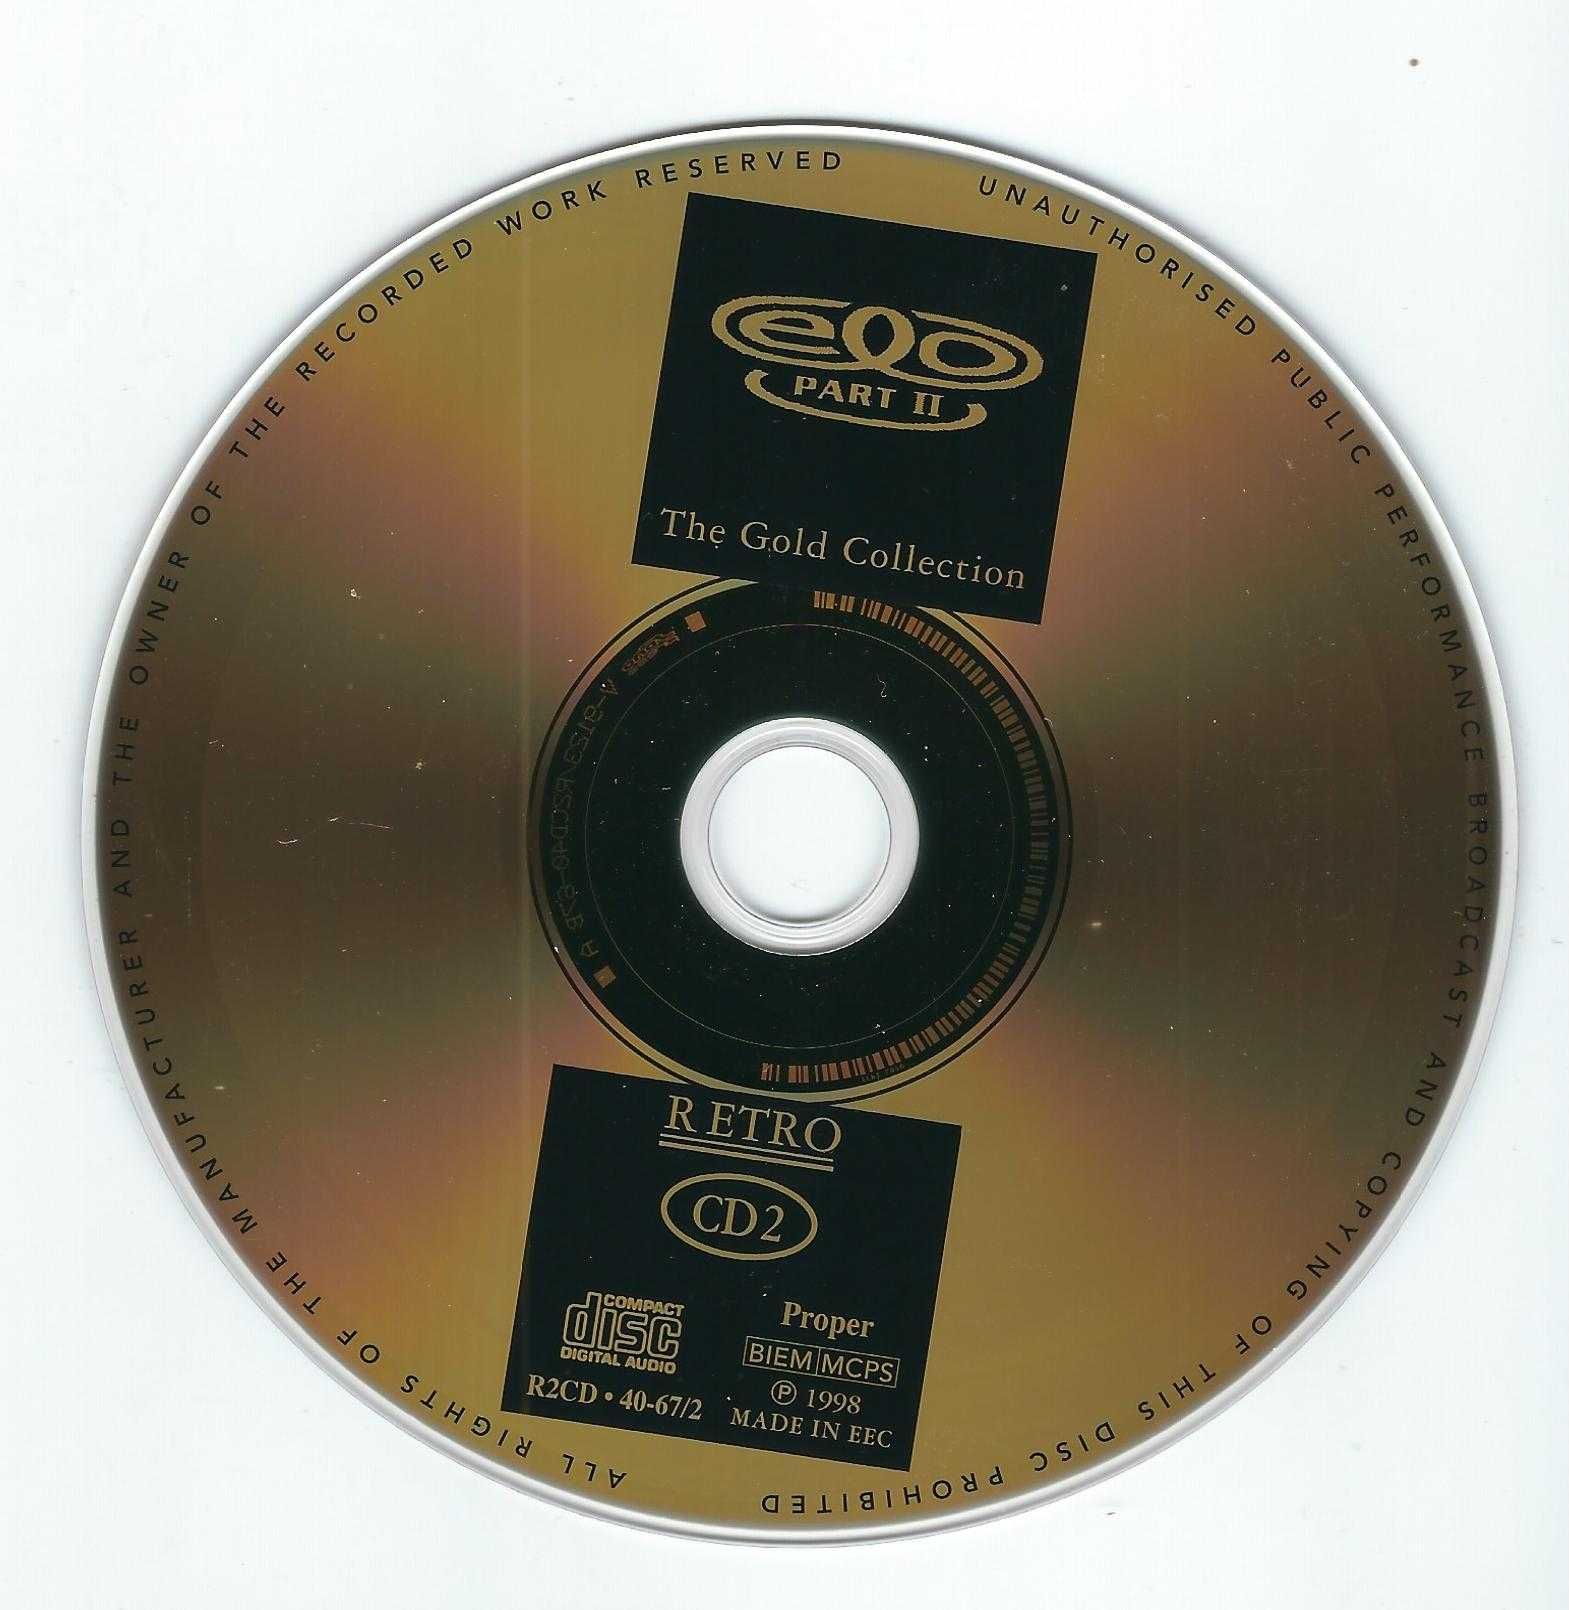 2 CD Electric Light Orchestra Part II - The Gold Collection (1998)